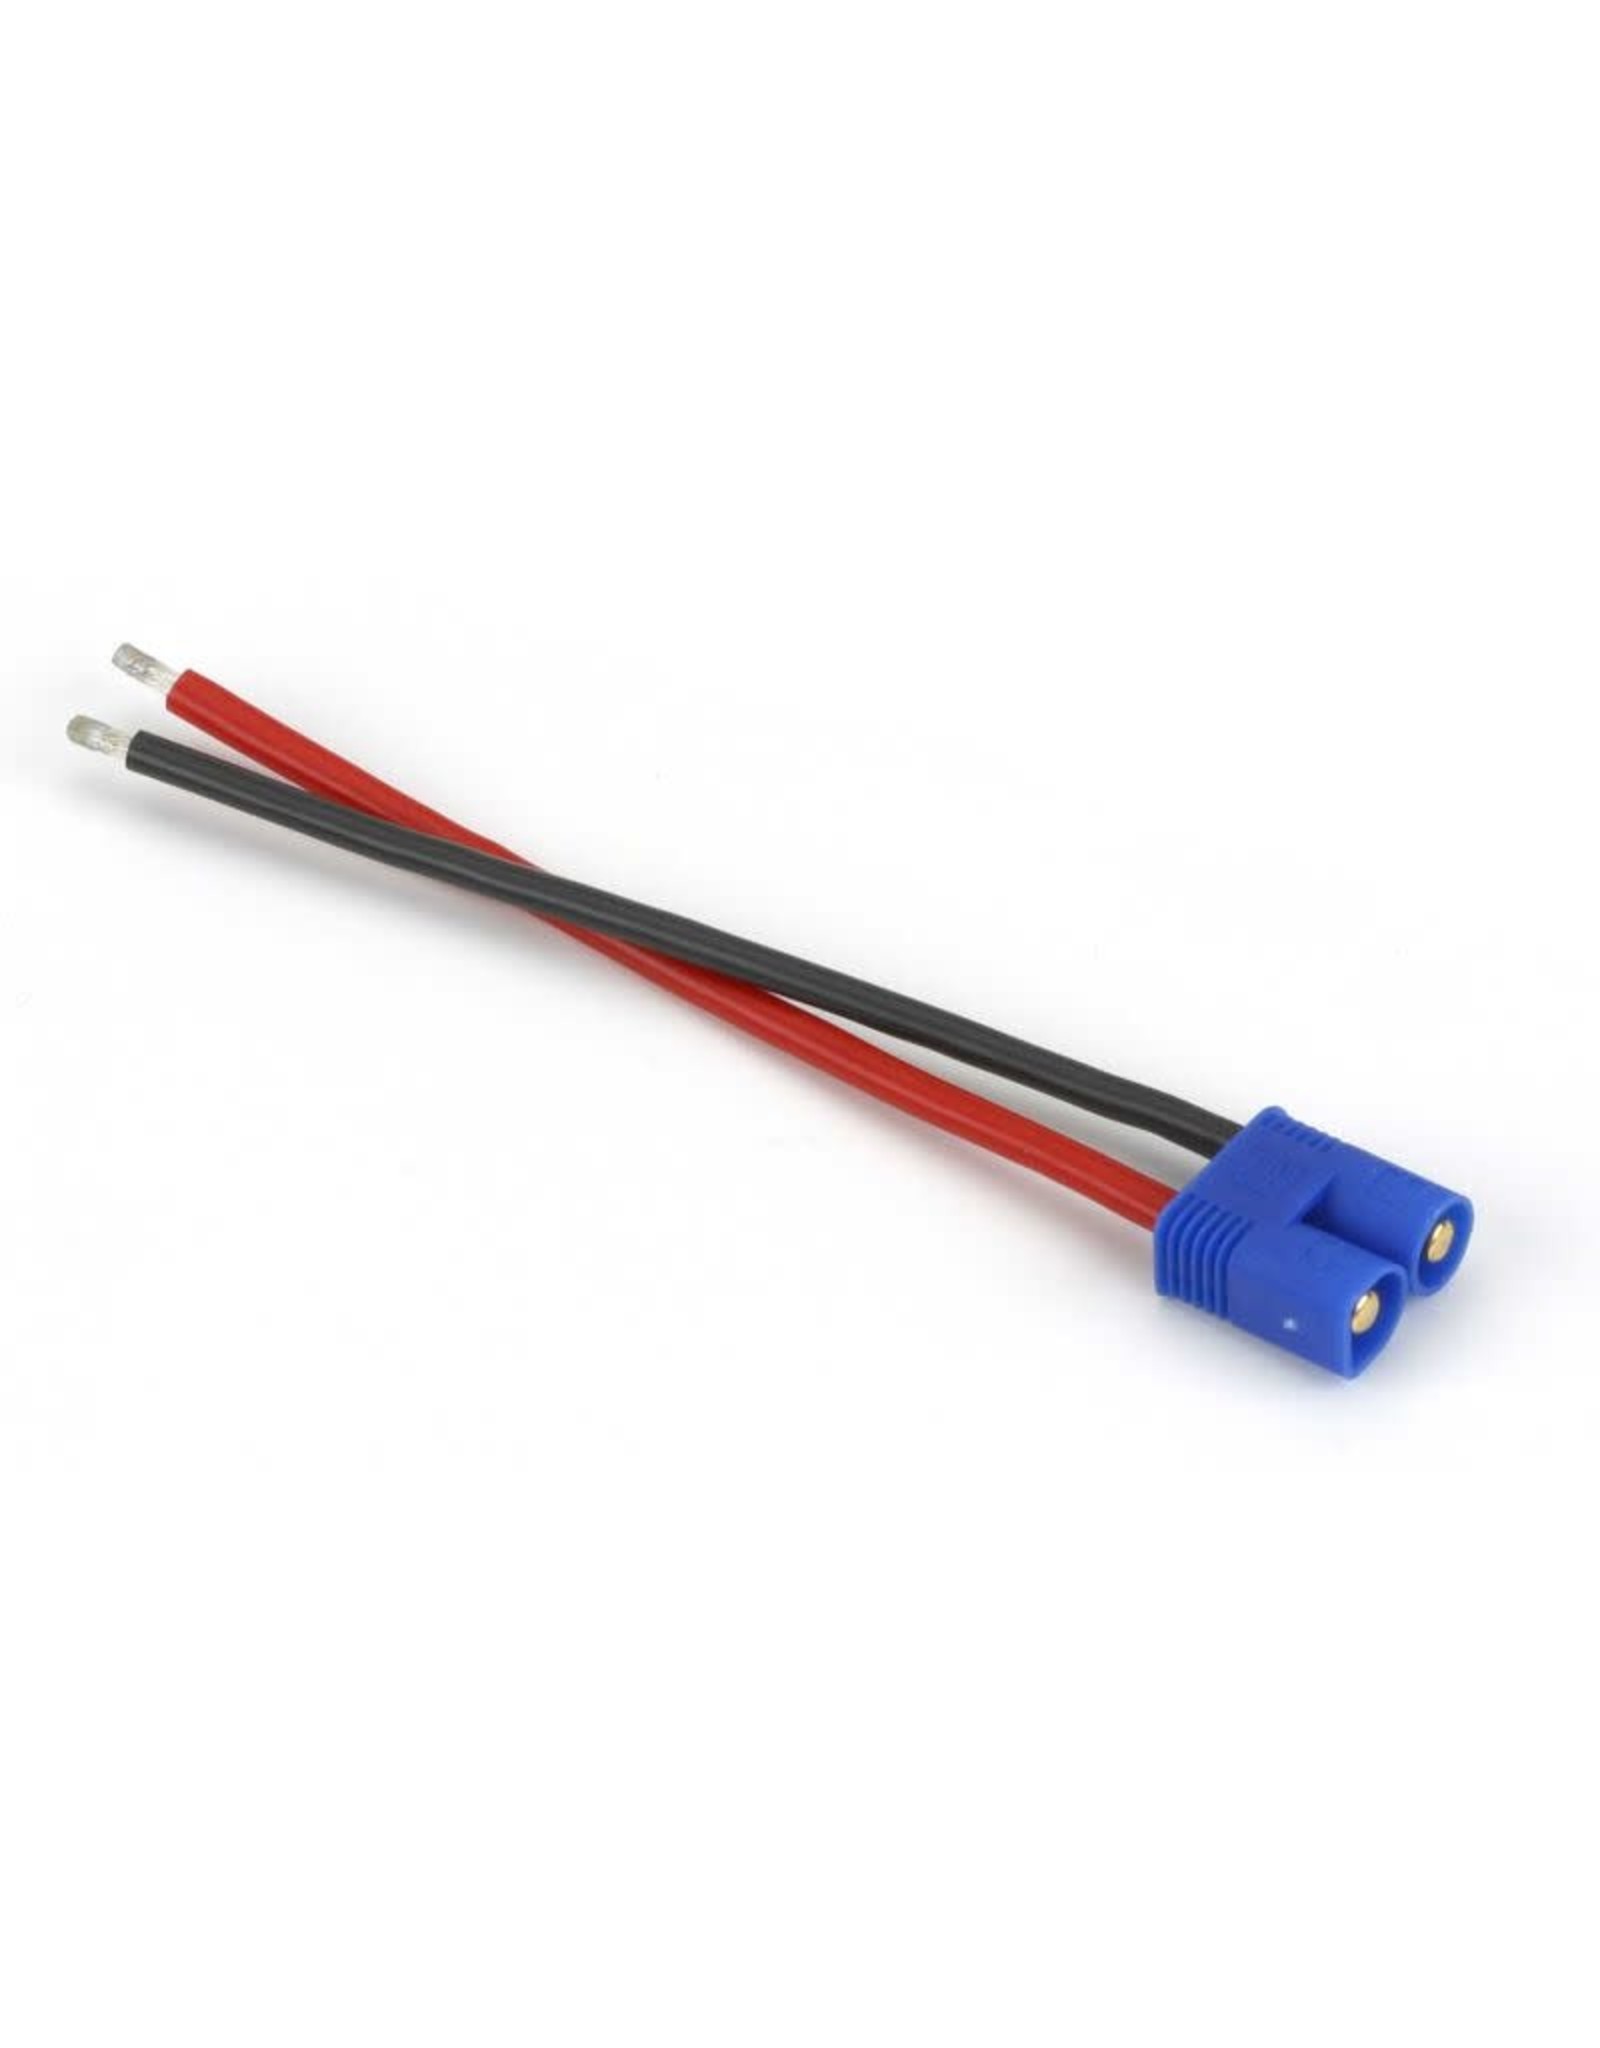 Eflite Connector: EC3 Device with 4" Wire, 16 AWG